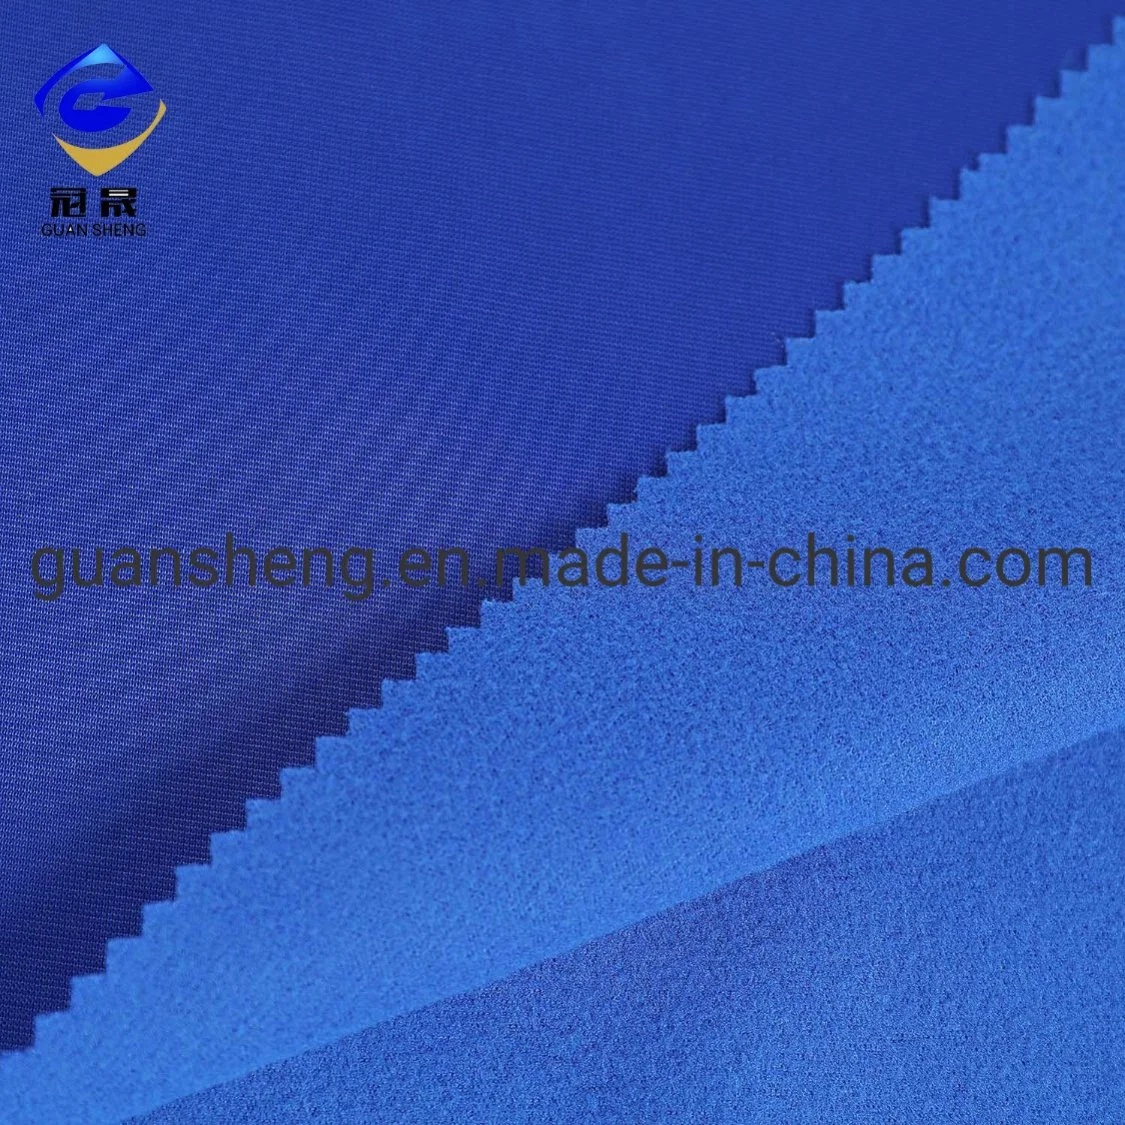 Original Factory 100%Polyester Gum Stay Non Woven Fusible Interlining Adhesive Fabric One Side Cut Away Non Woven Interlining Fabric for Garment